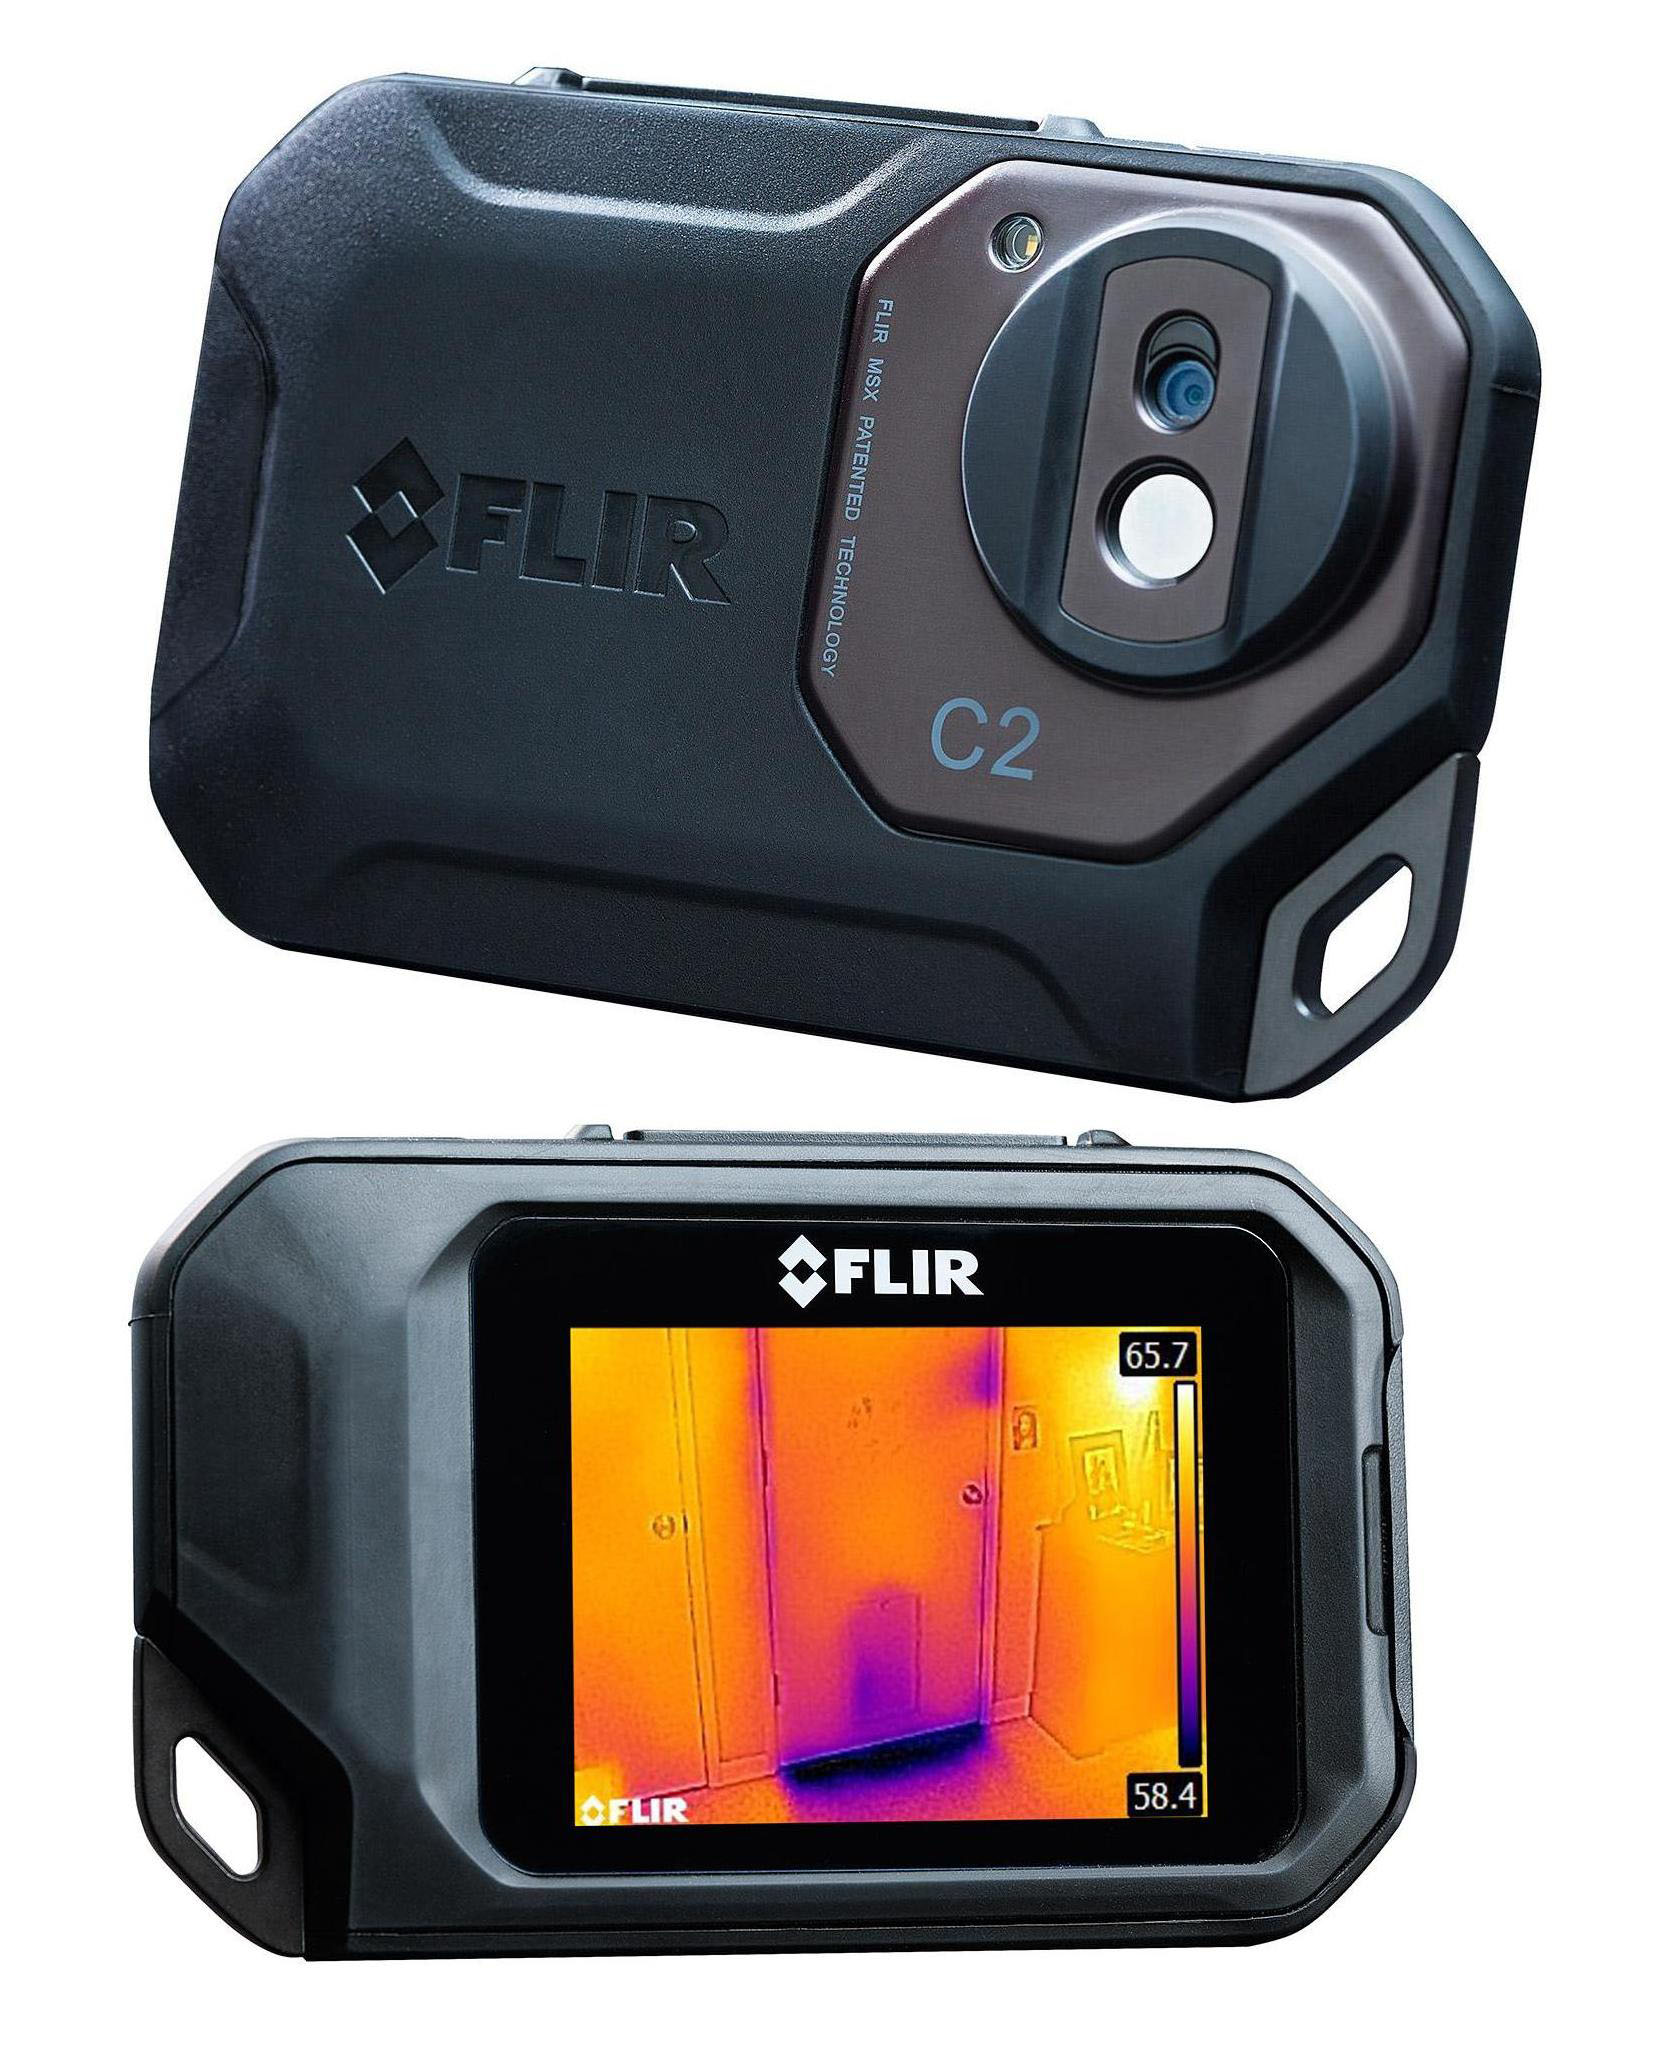 72001-0101 with MSX FLIR C2 Compact Pocket-Sized Thermal Imaging Camera System 